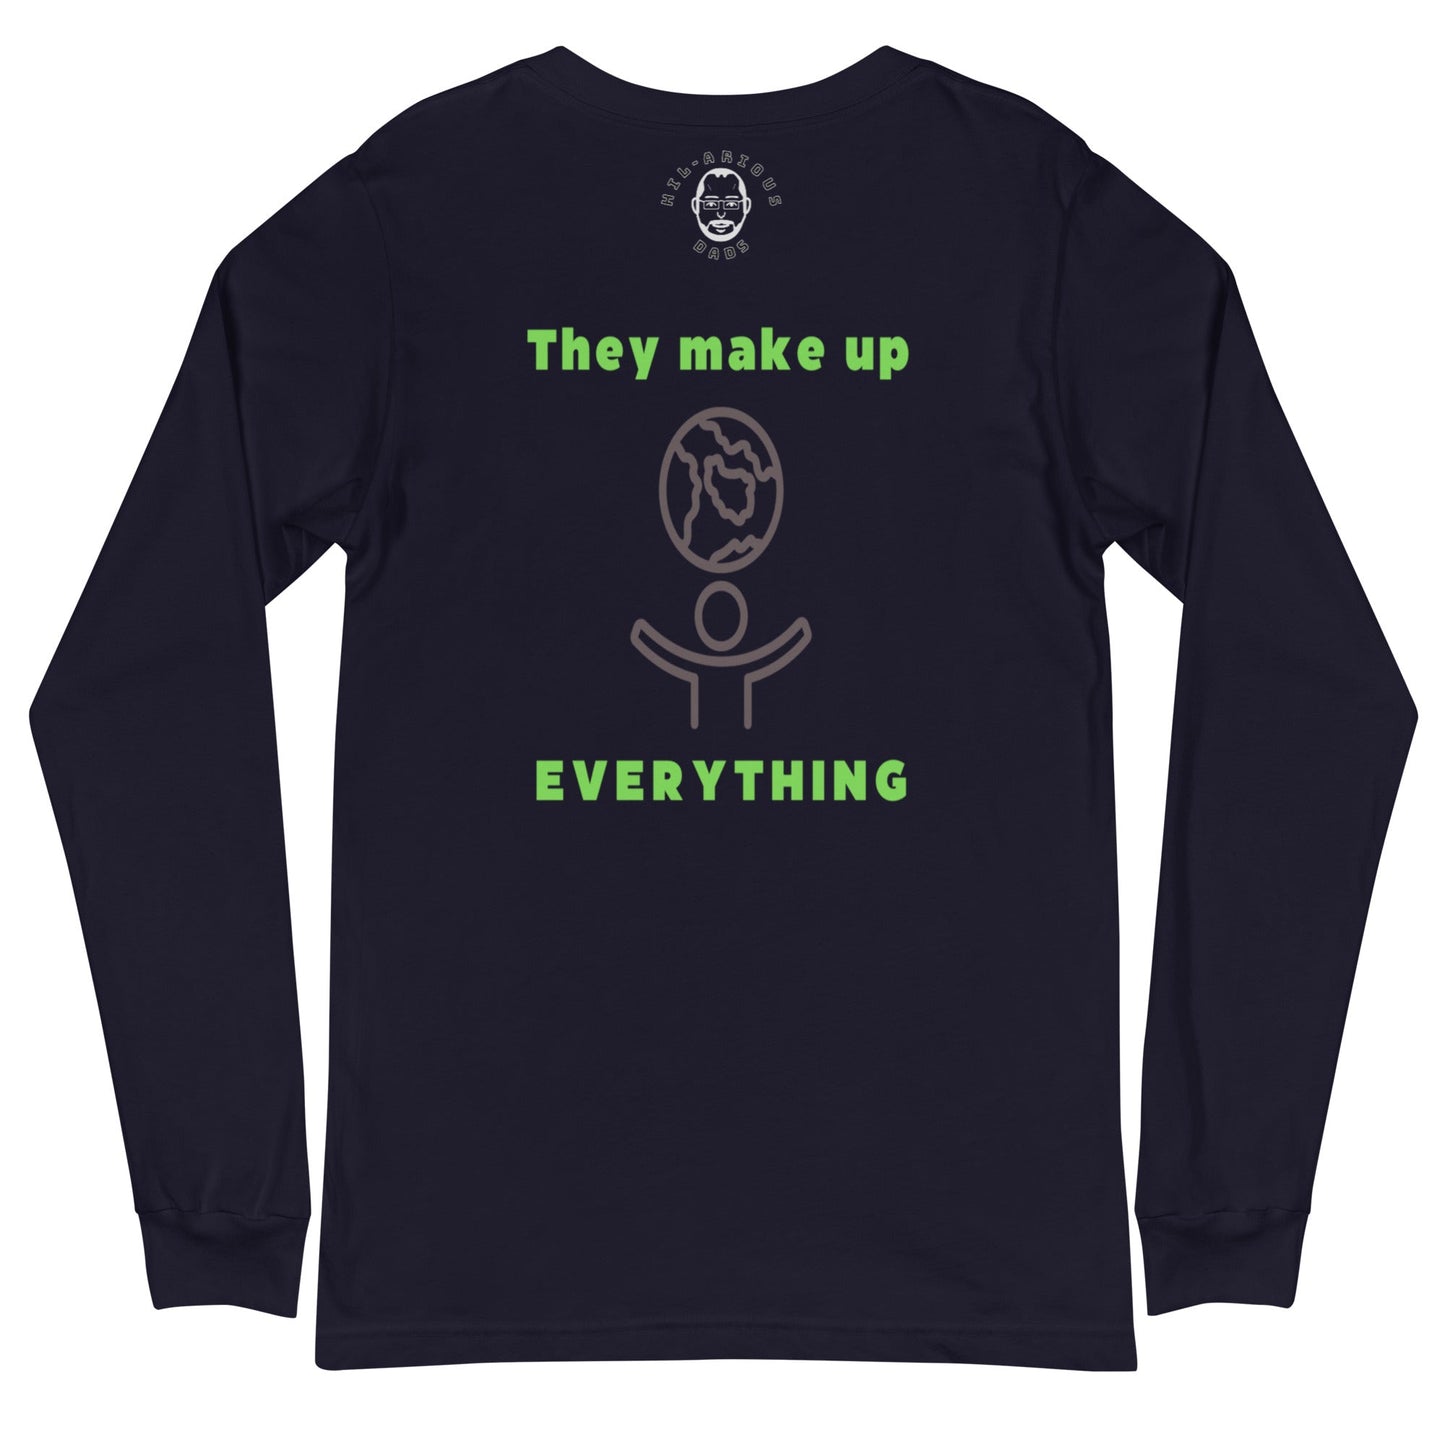 Don't trust atoms-Long Sleeve Tee - Hil-arious Dads